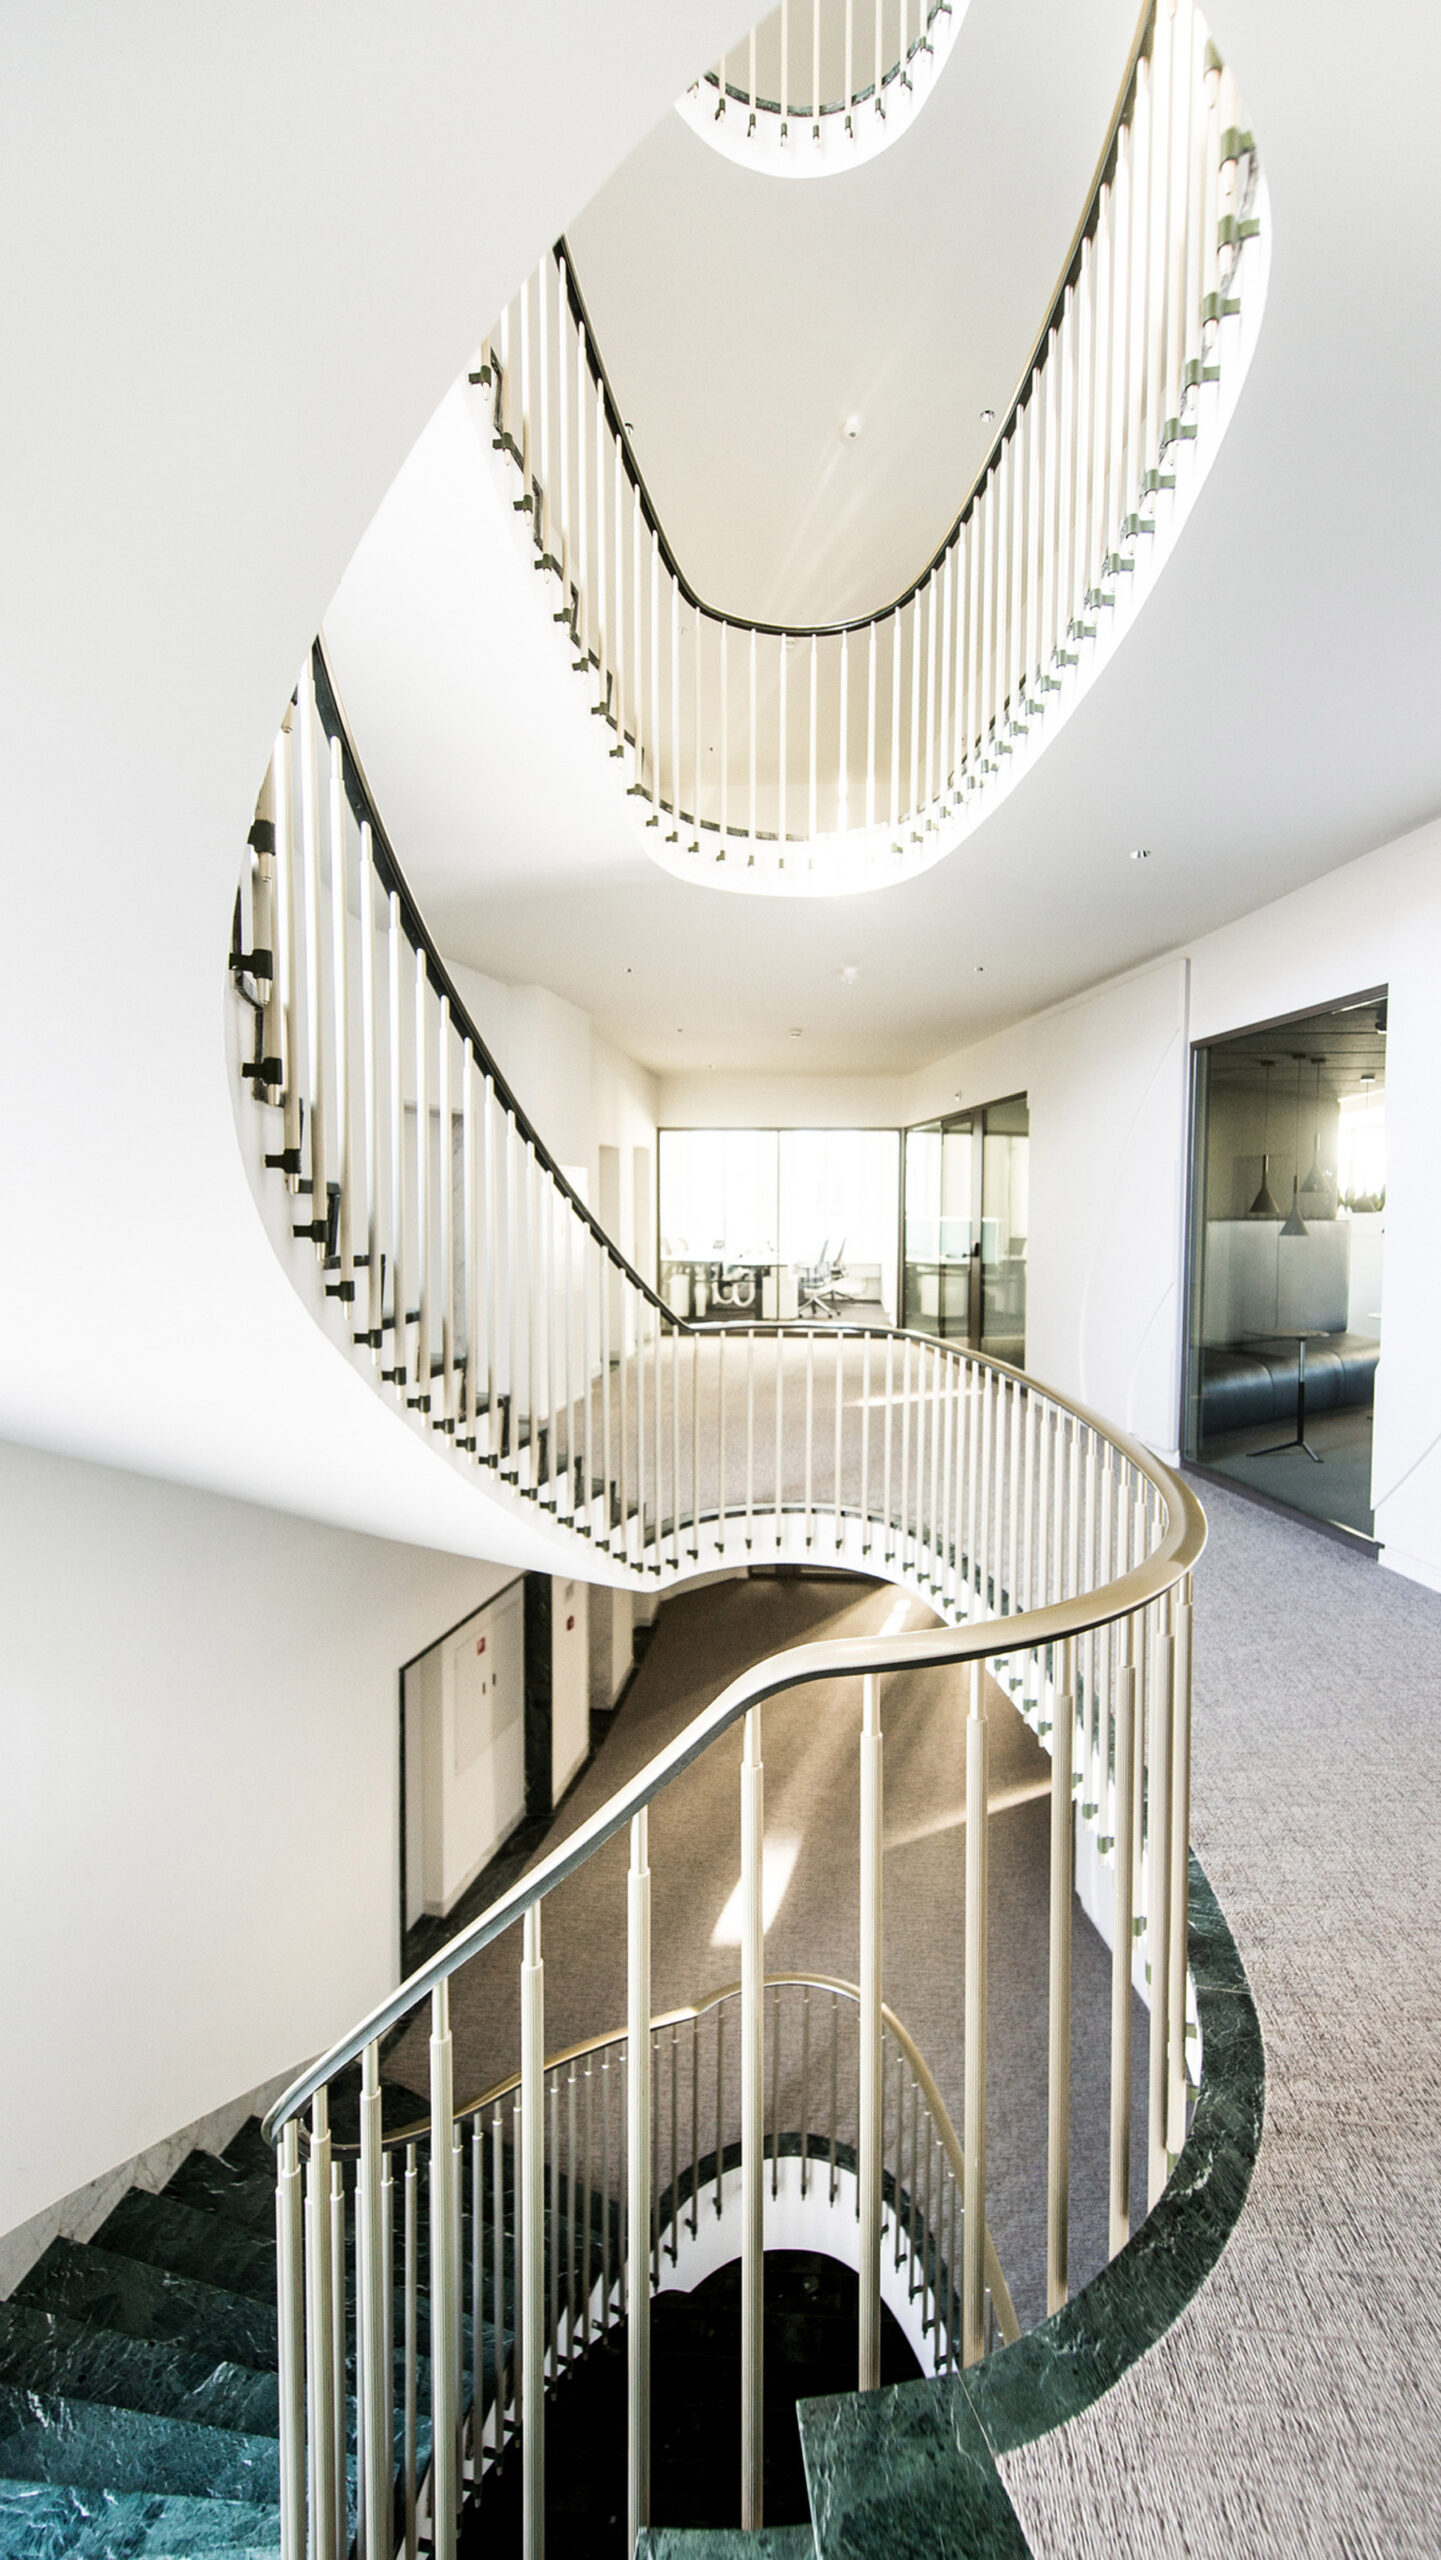 Elegant spiral staircase with white balustrades creating a visually striking contrast against the dark polished stone flooring. The design offers a seamless flow through the levels, complemented by abundant natural light reflecting off the crisp, clean lines.